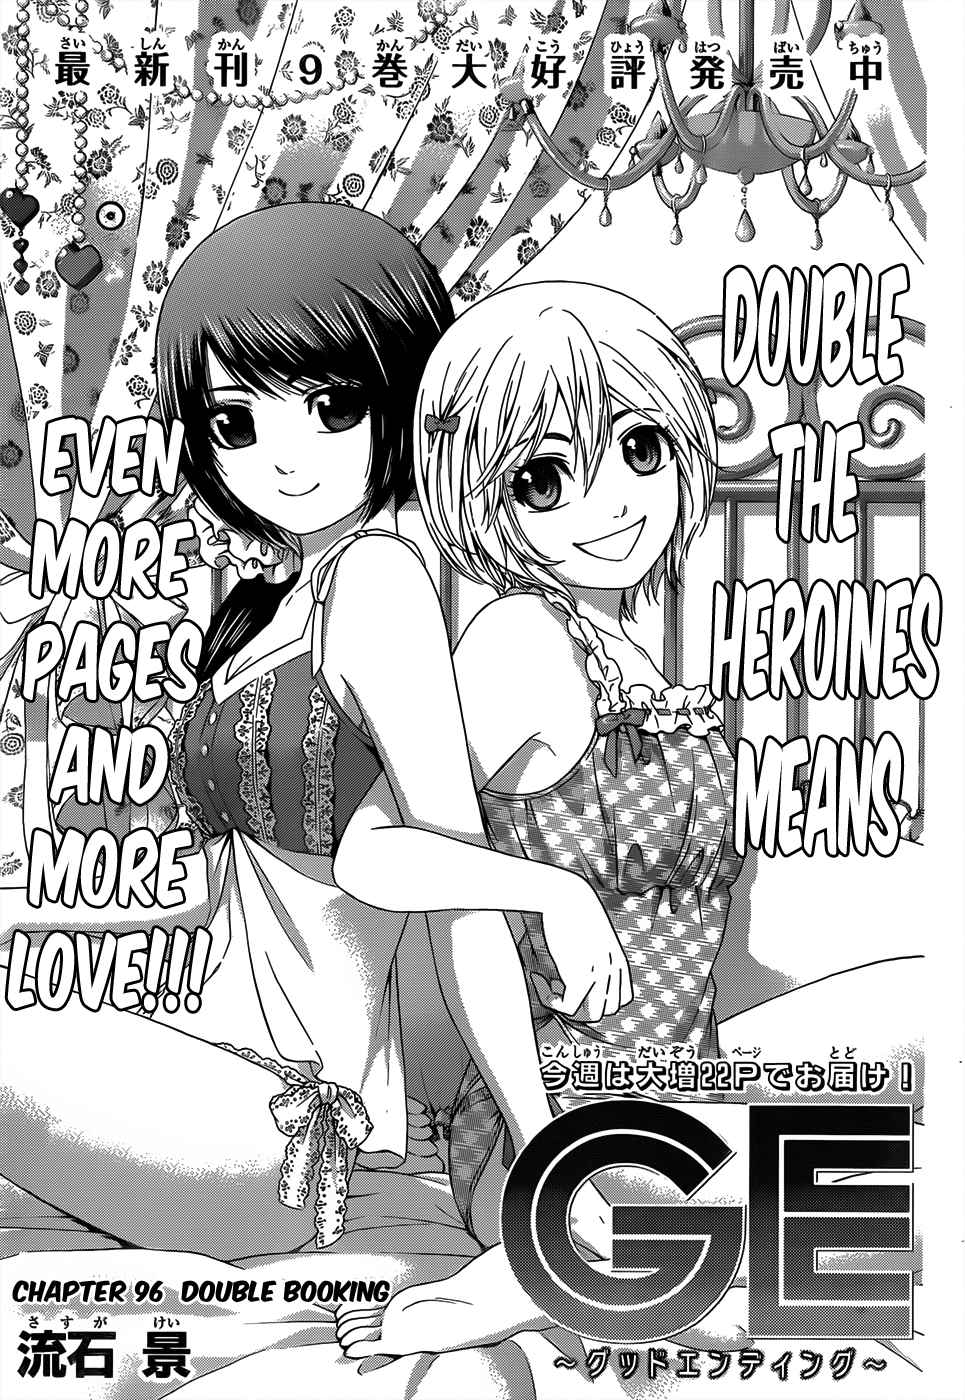 GE ~Good Ending~ Vol. 10 Ch. 96 Double Booking